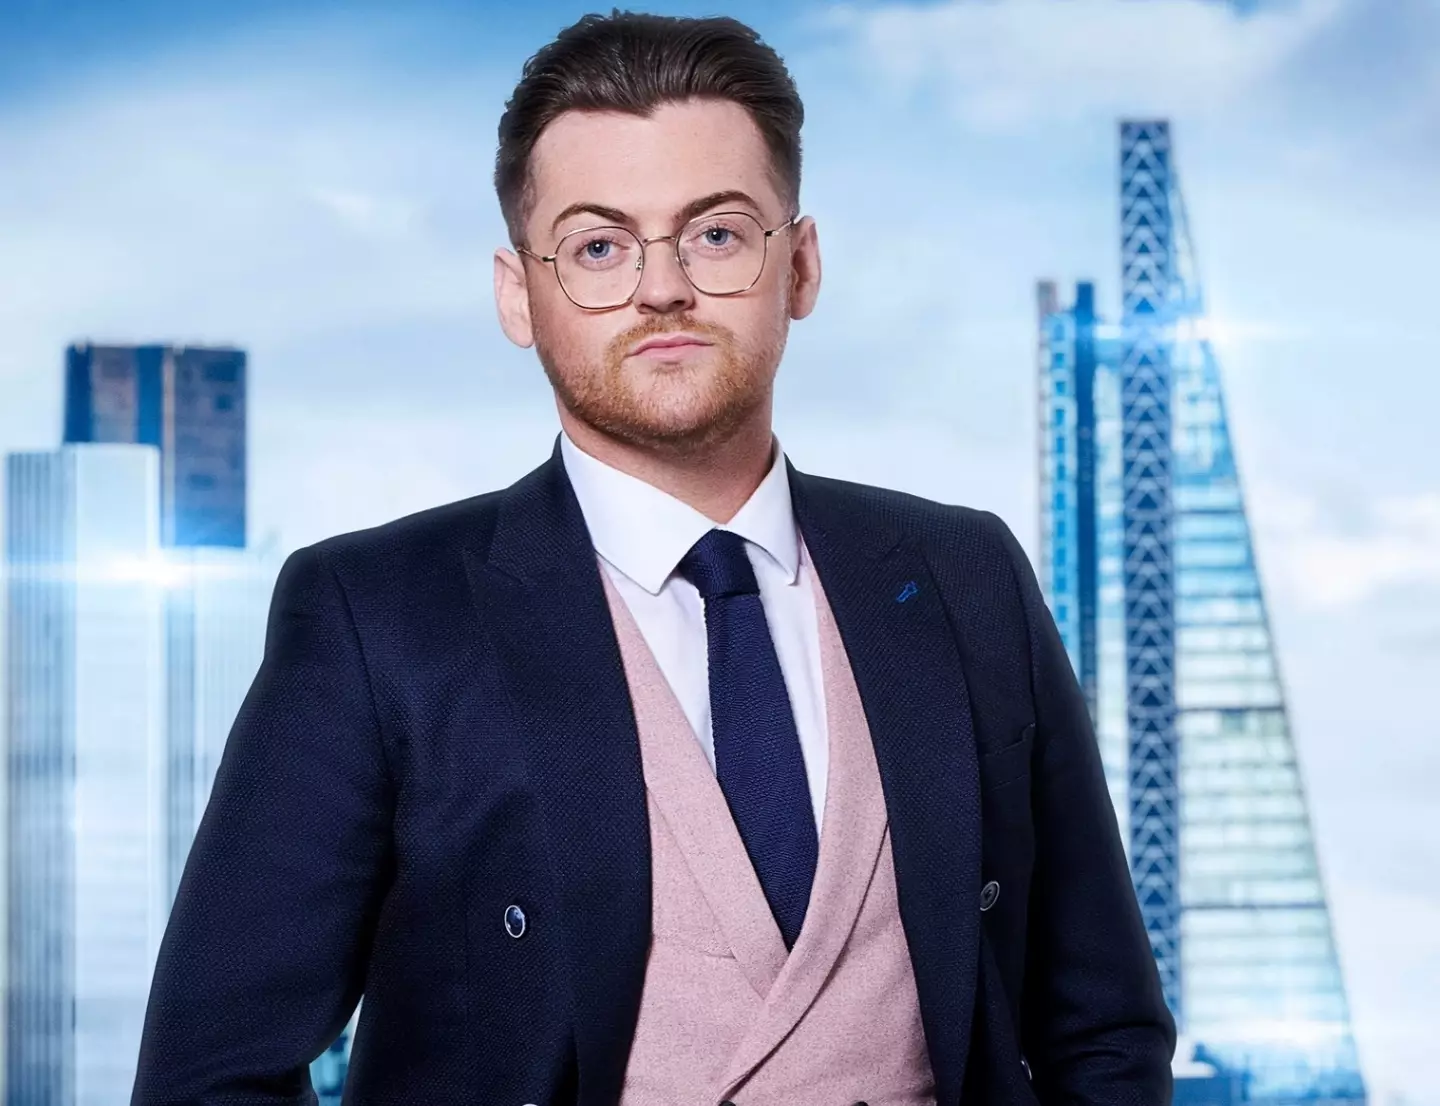 Reece Donnelly is a contestant in the new series of The Apprentice.